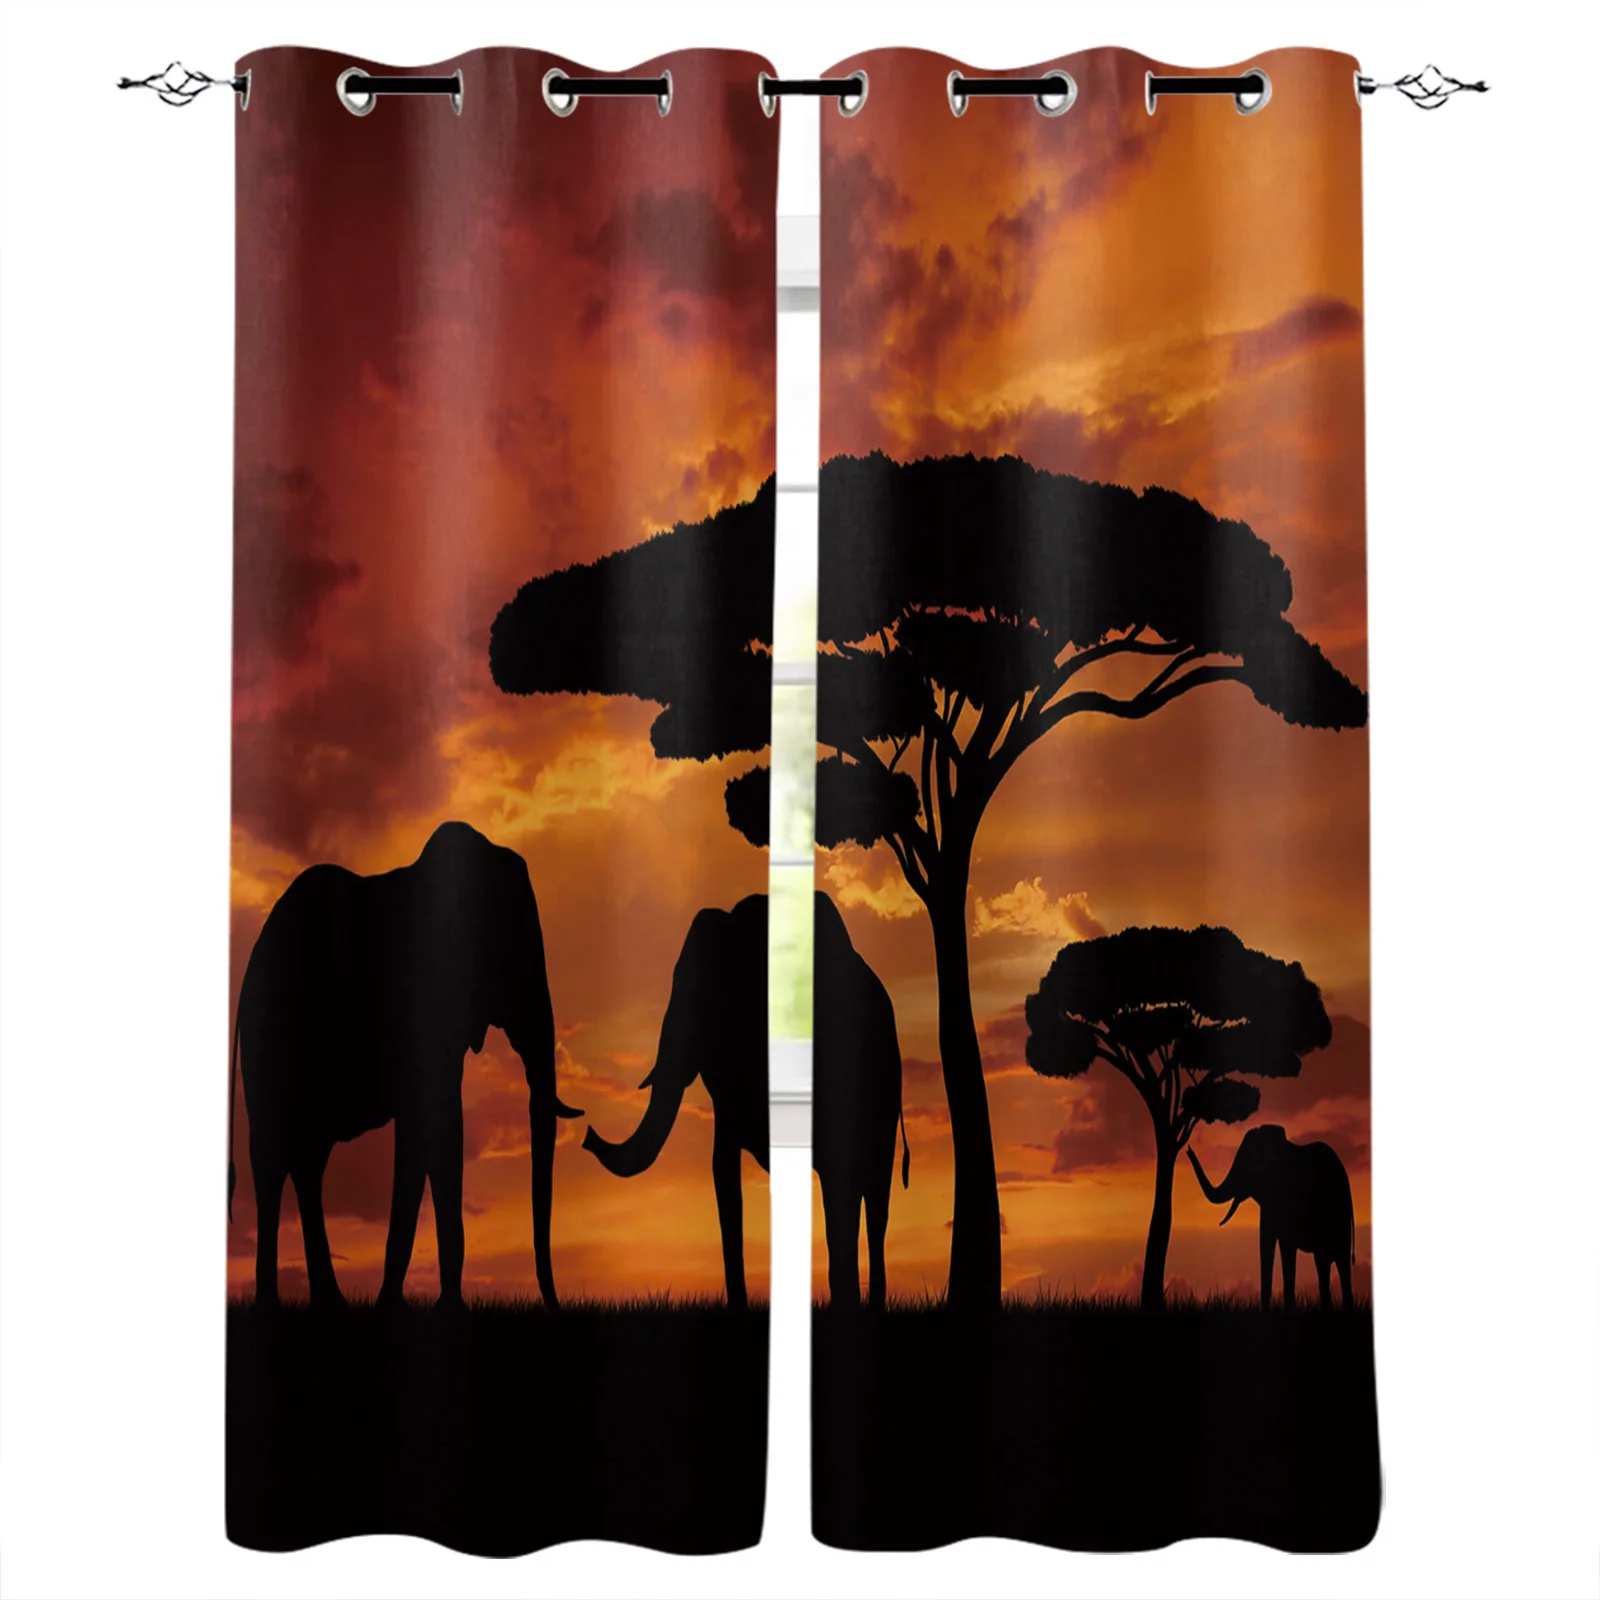 

Africa Indian Elephant Curtain for Living Room Kids Room Decoration Bedroom Curtain Window Treatment Drapes